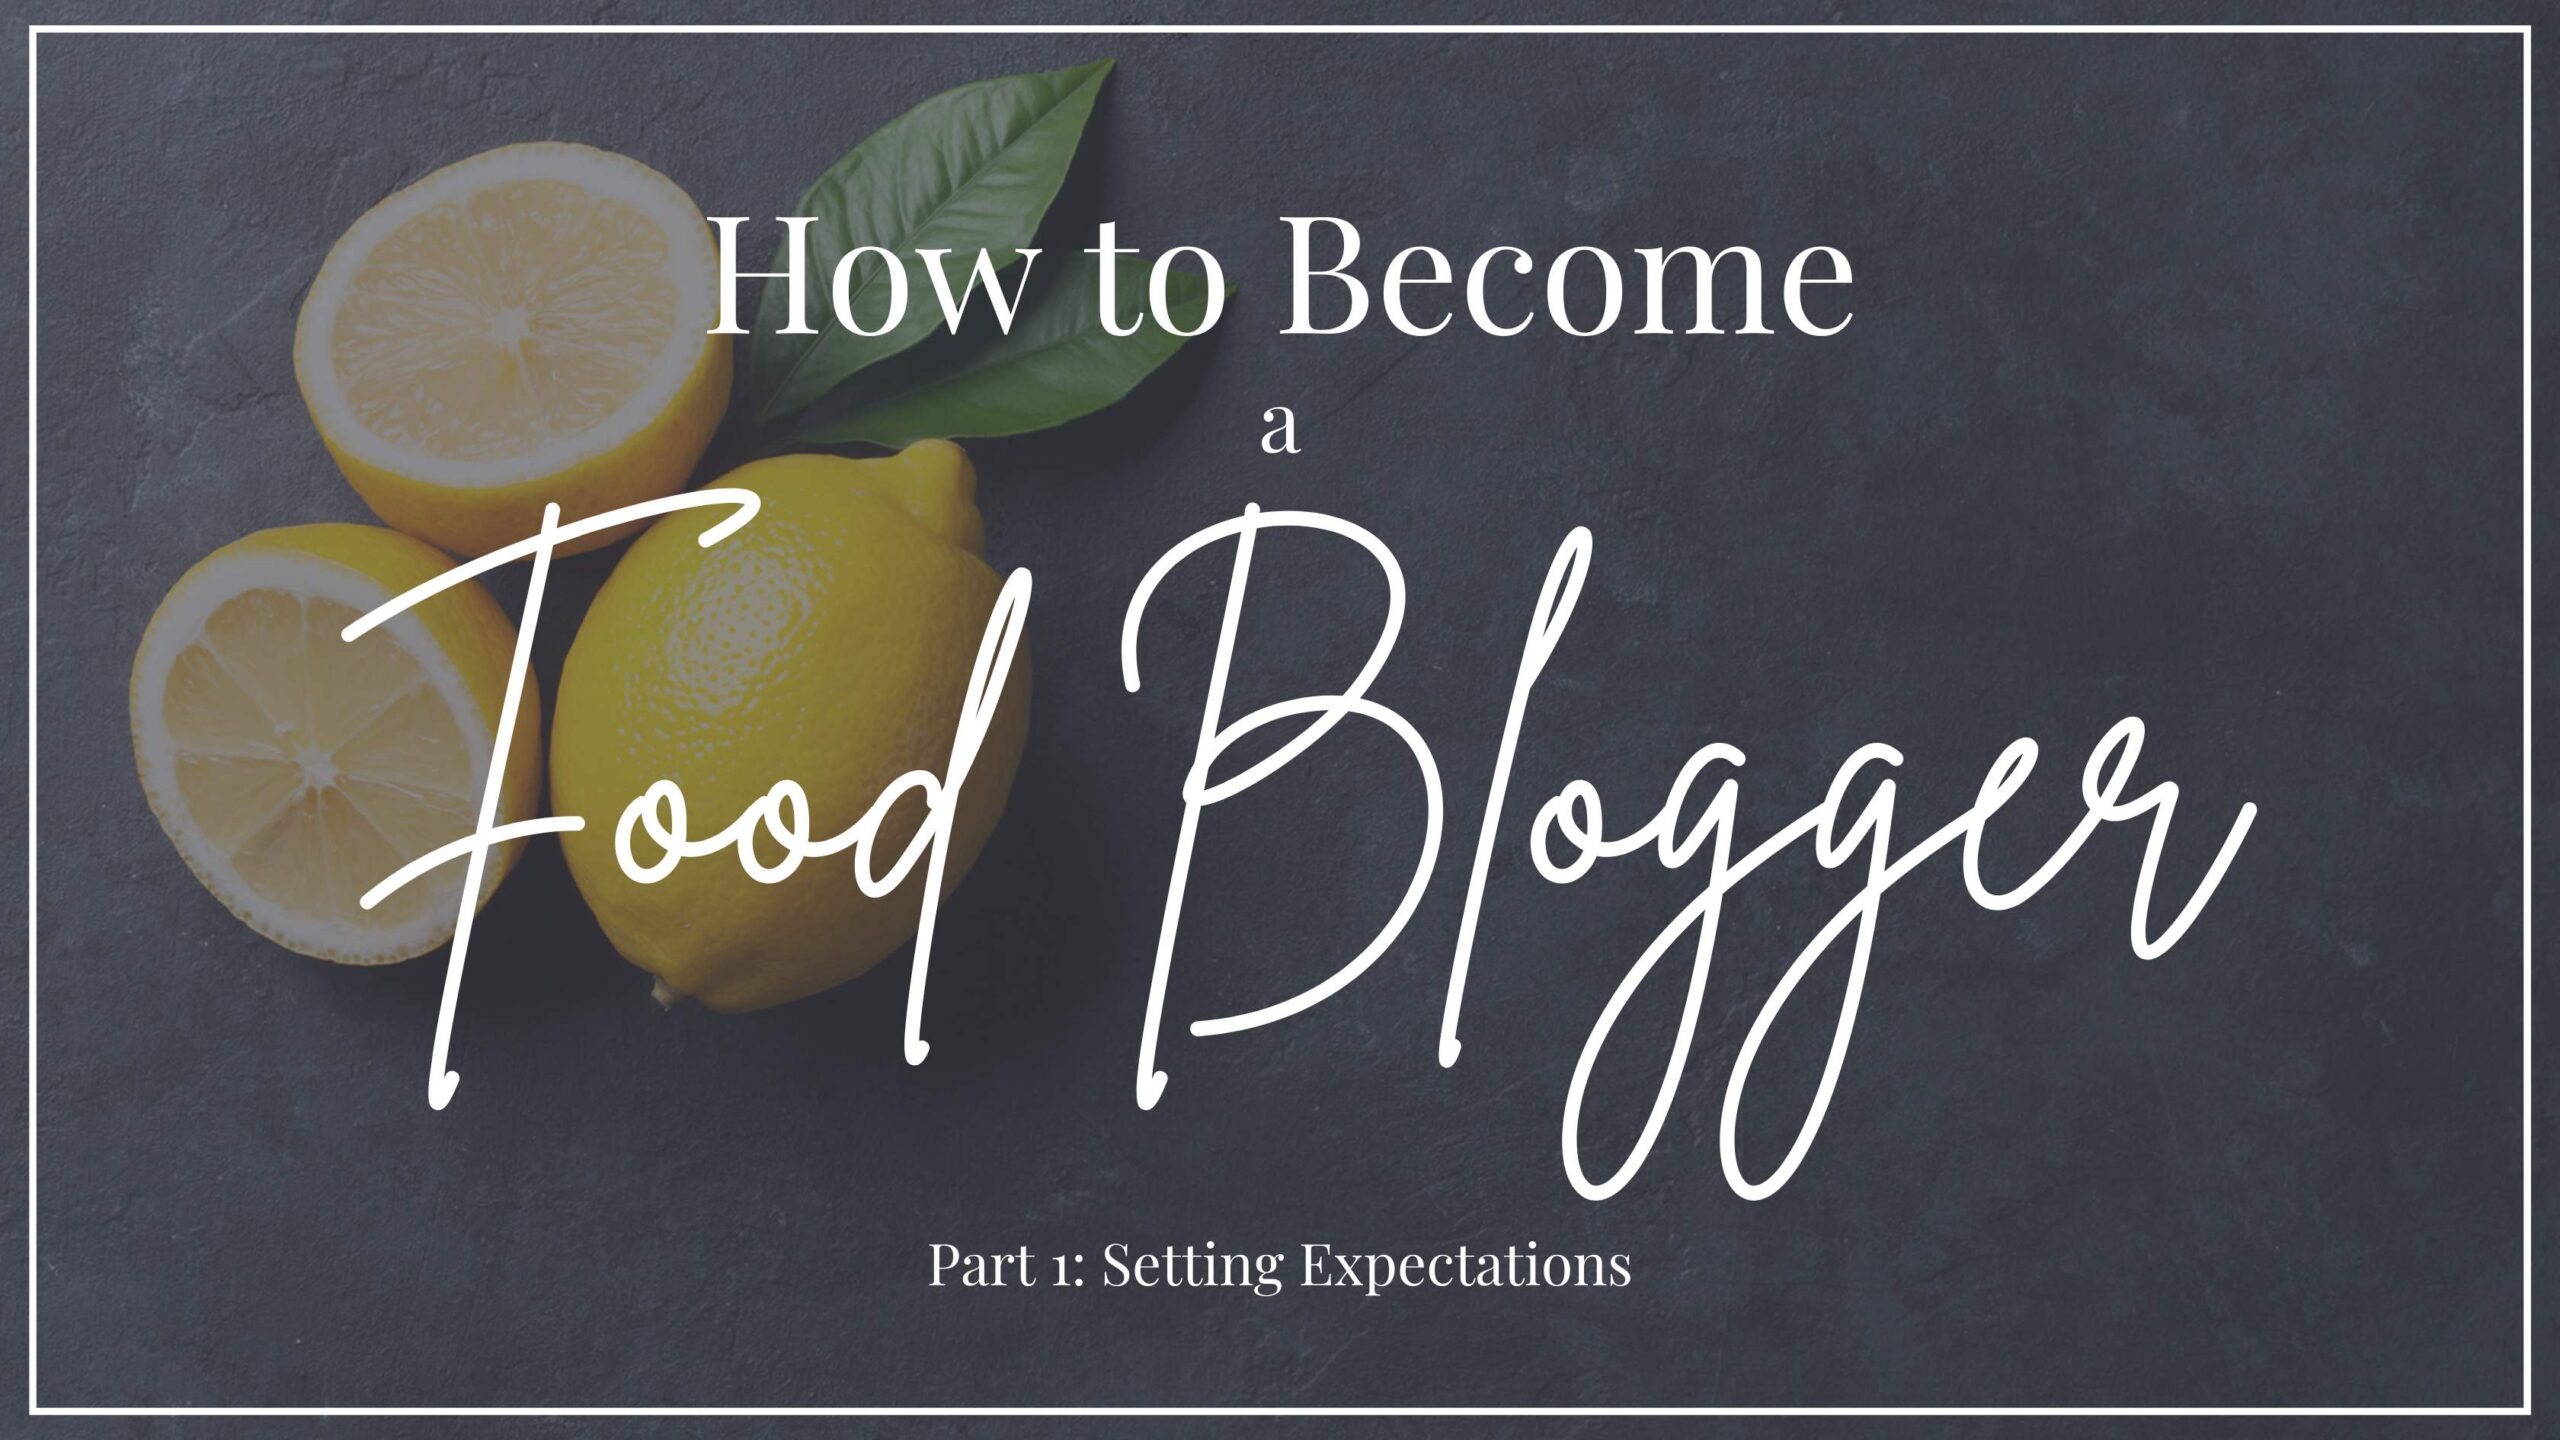 how to become a food blogger banner with citrus fruits